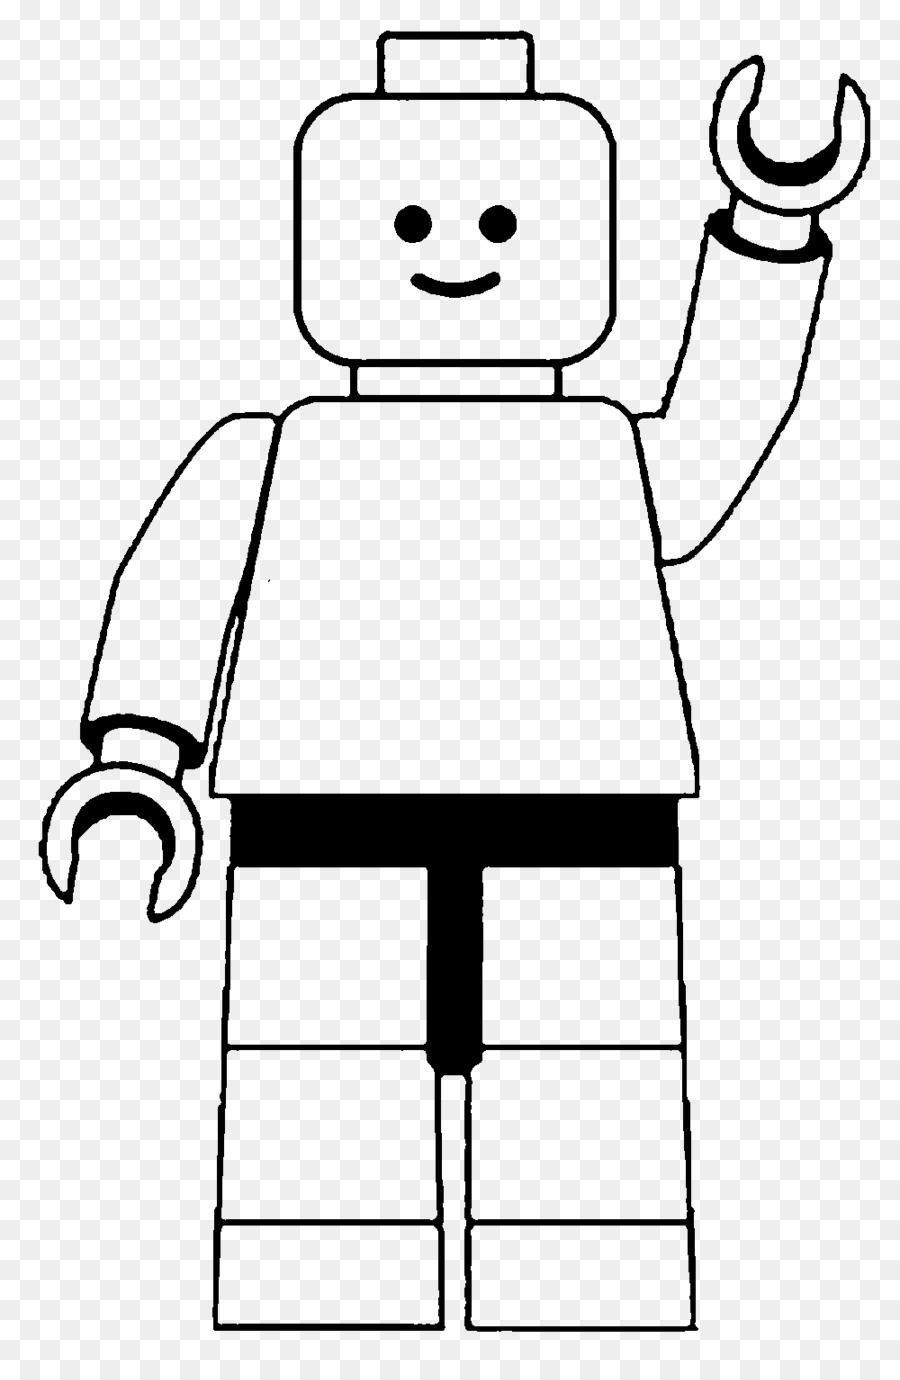 Lego minifigure Lego Ninjago Toy Clip art - toy png download - 1000*1517 - Free Transparent Lego png Download.